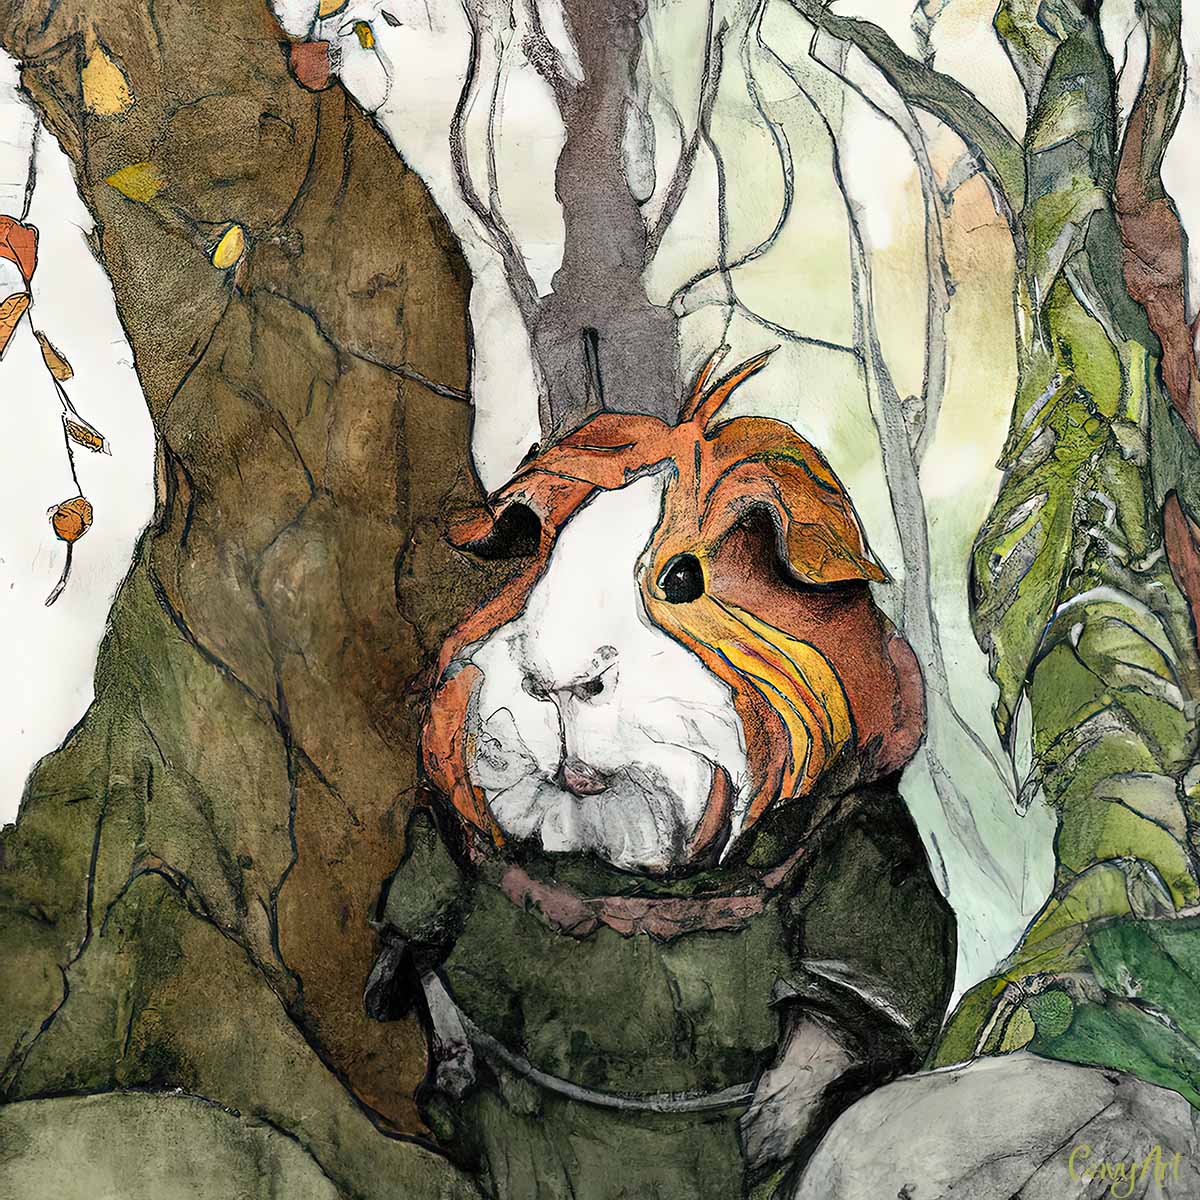 A guinea pig in a forest illustration from CavyArt